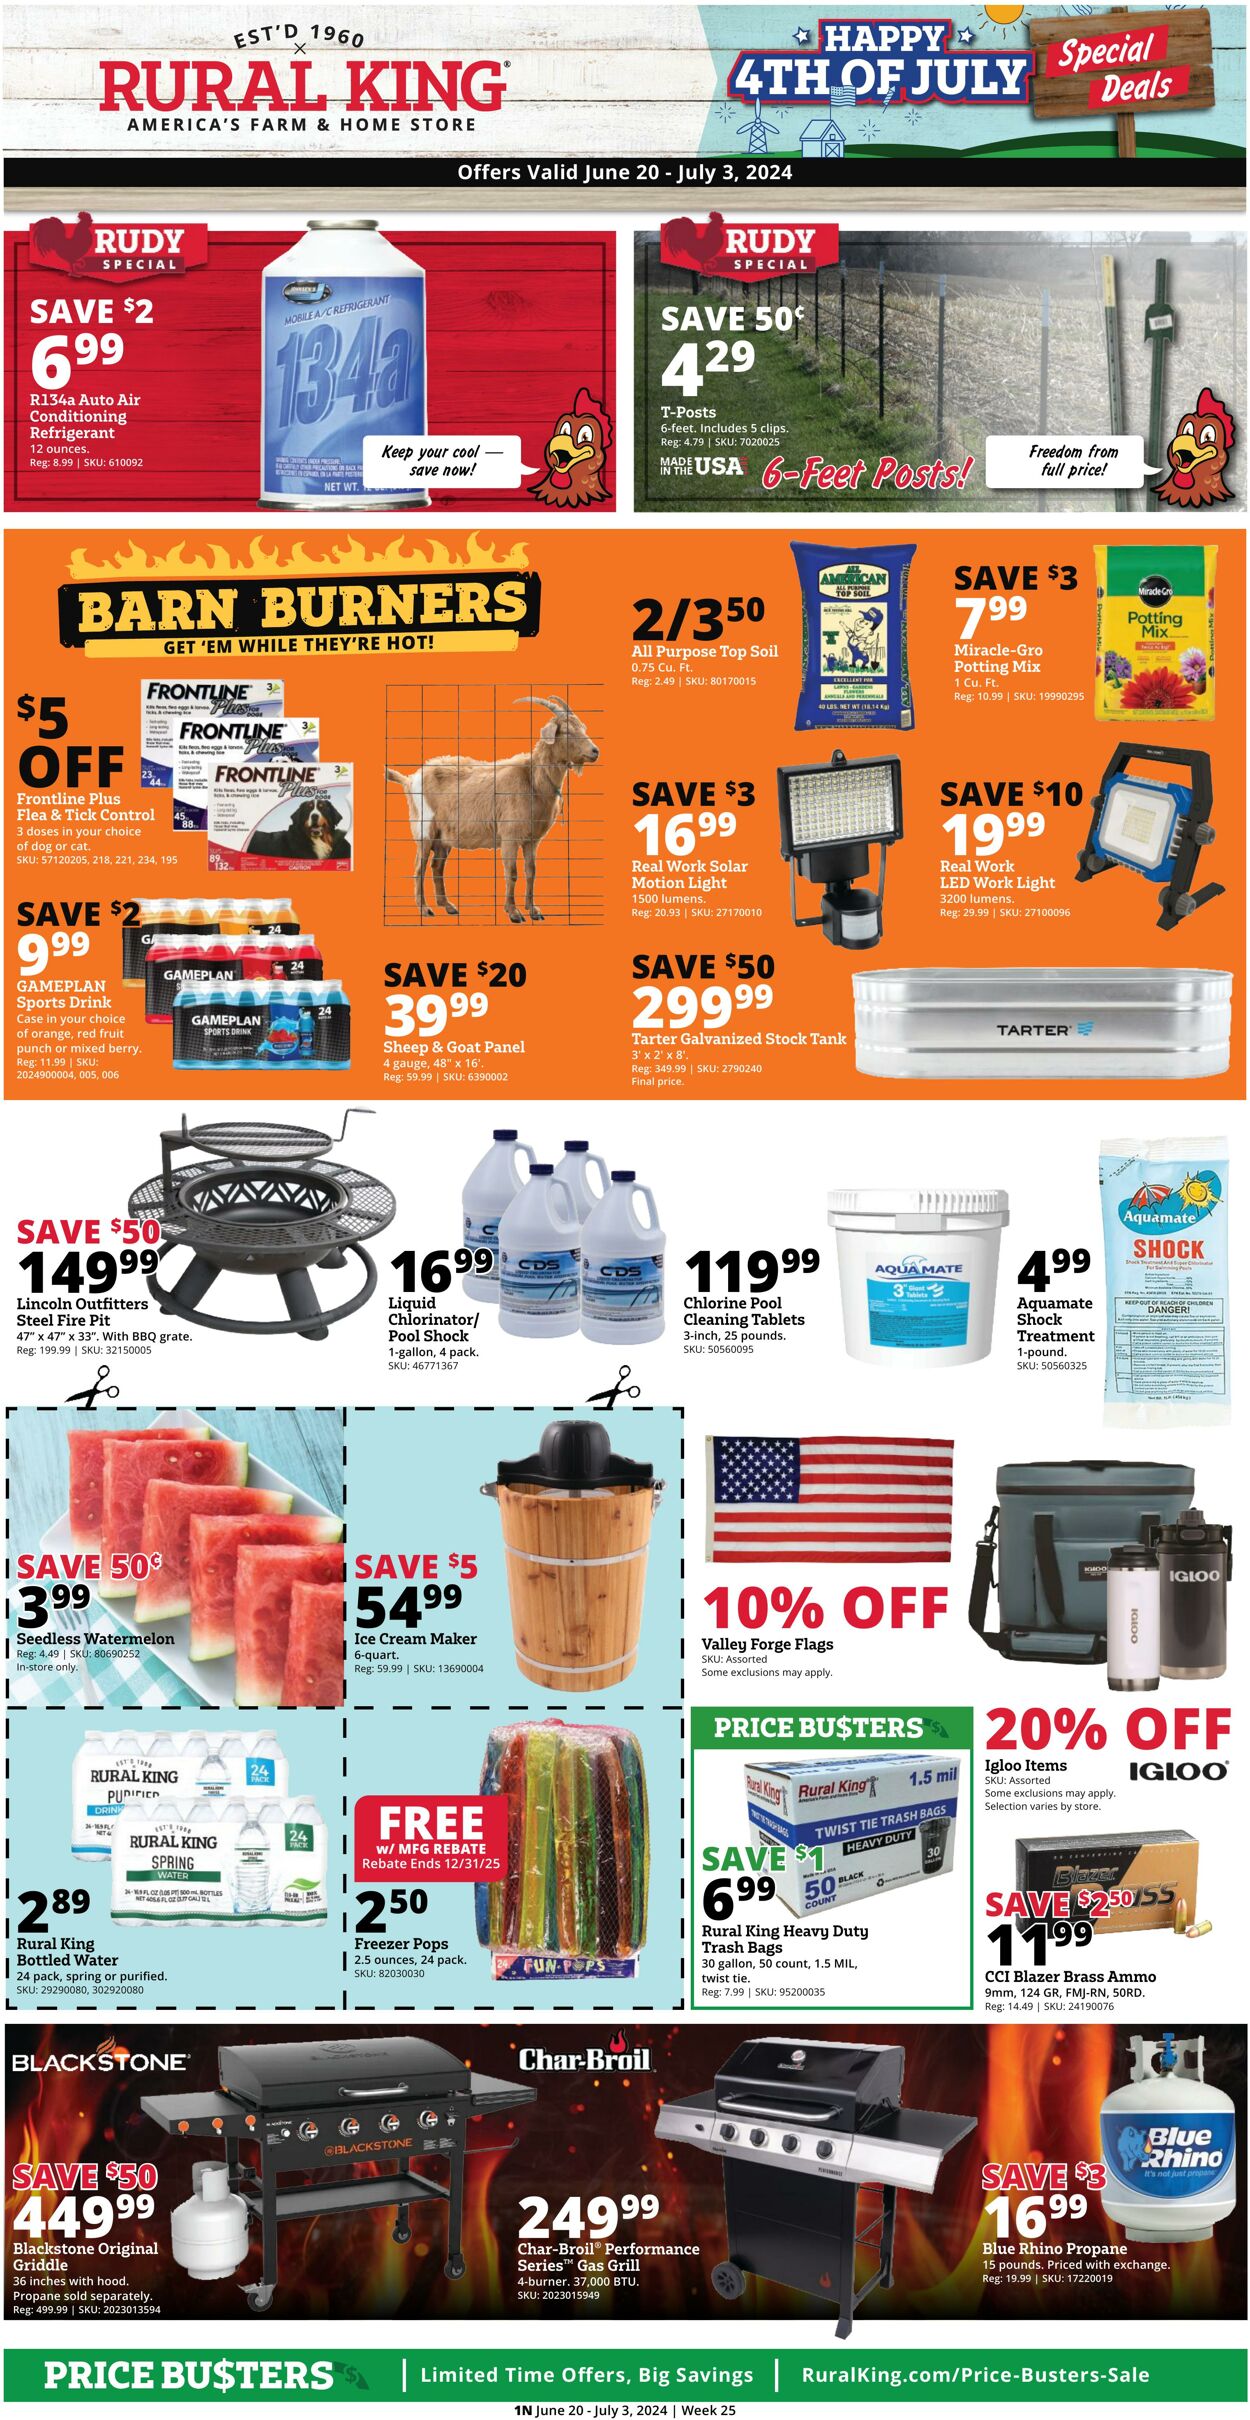 Rural King Promotional weekly ads